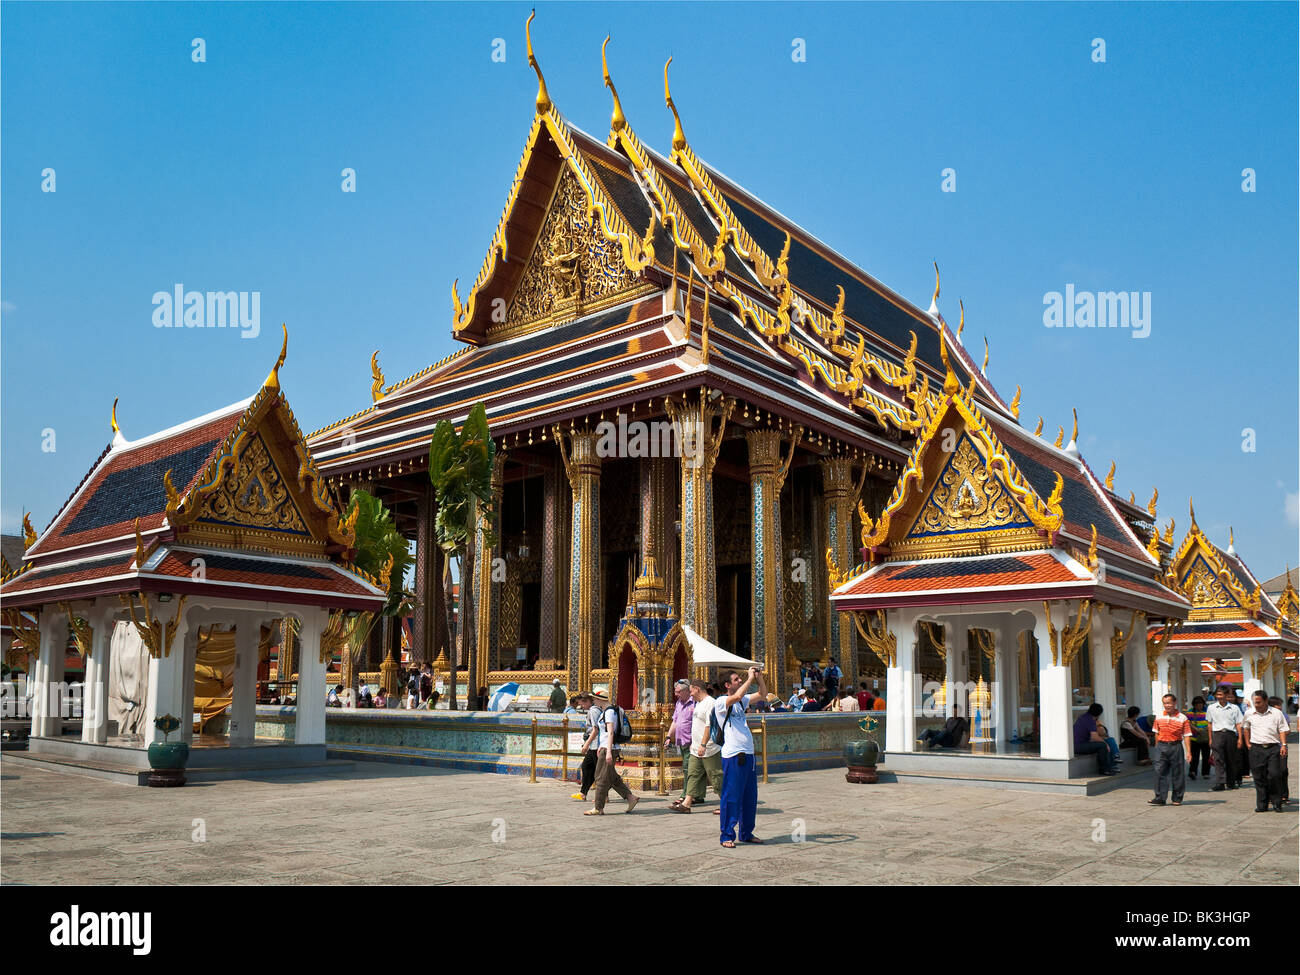 Wat Phra Kaew, The Temple of the Emerald Buddha, at The Grand Palace in Bangkok, Thailand. Stock Photo